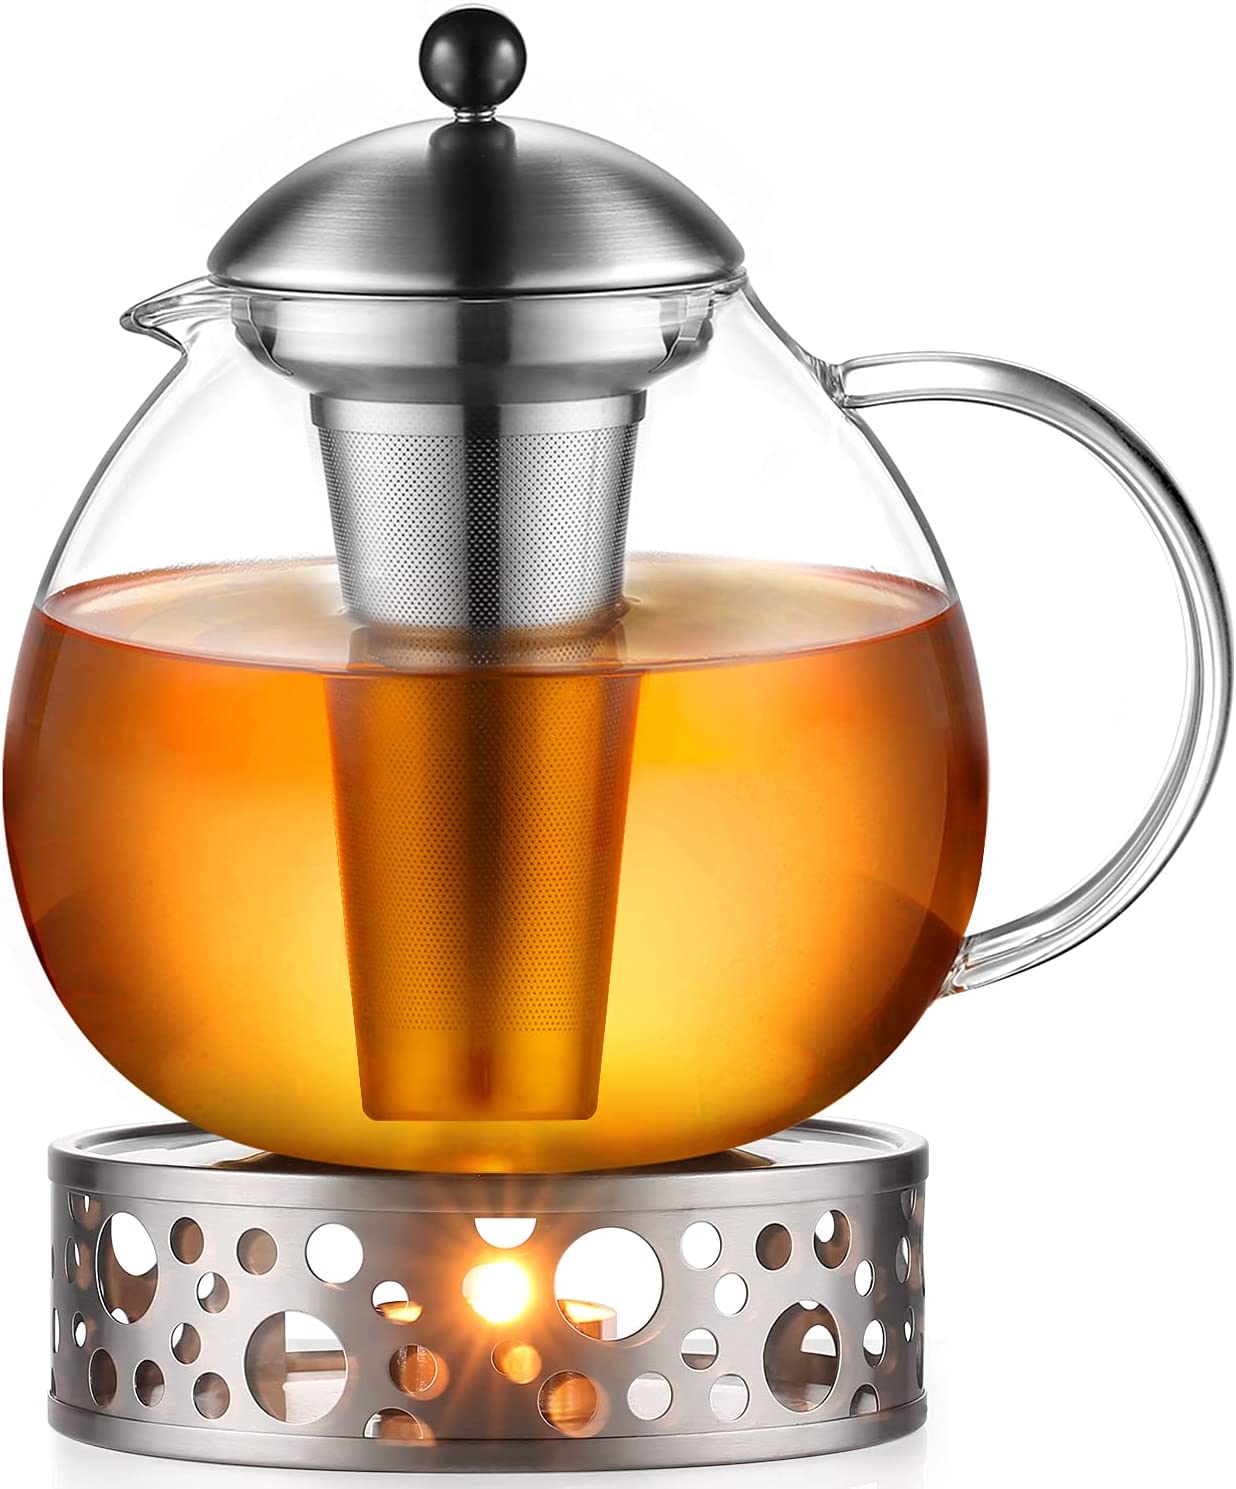 glastal 2000 ml Silver Teapot with Teapot Warmer Glass and Stainless Steel Tea Cosy Teapot Suit